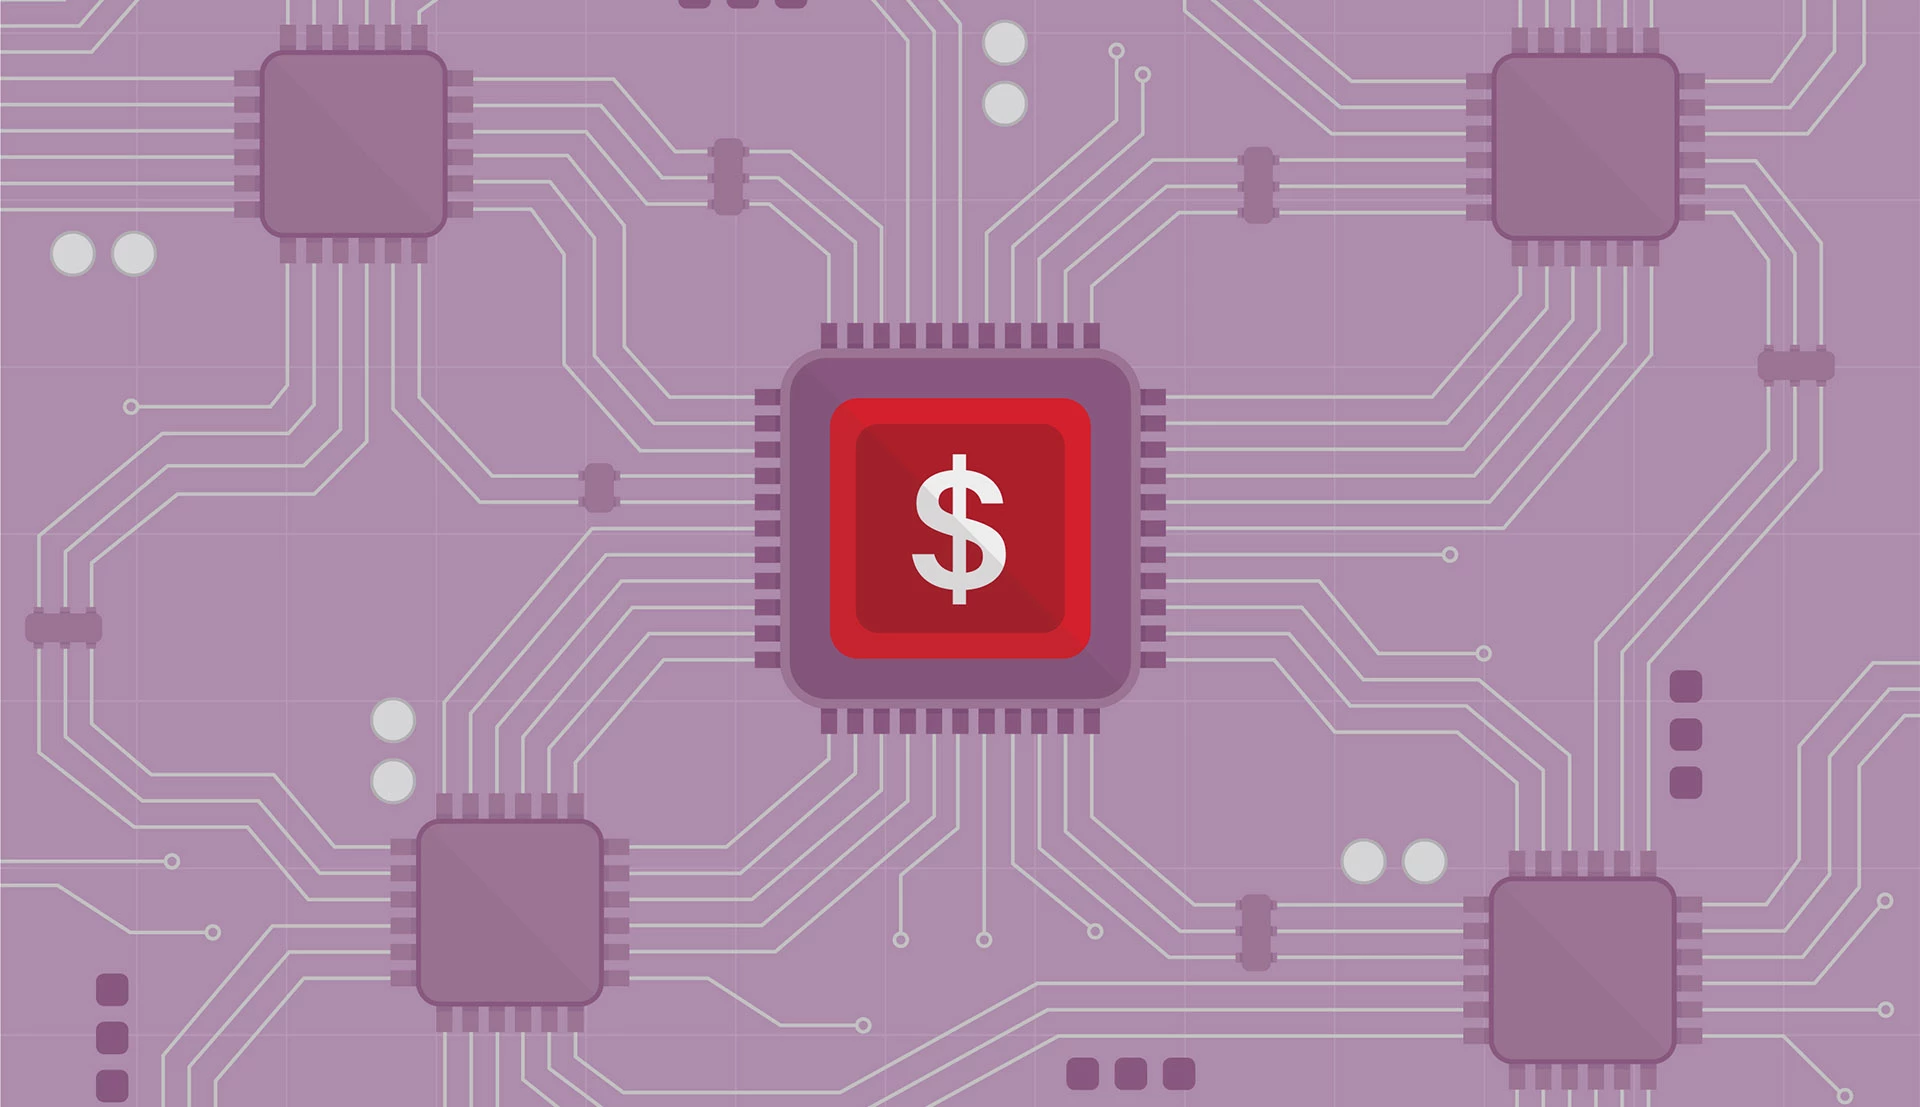 Dollar sign on a chipset.